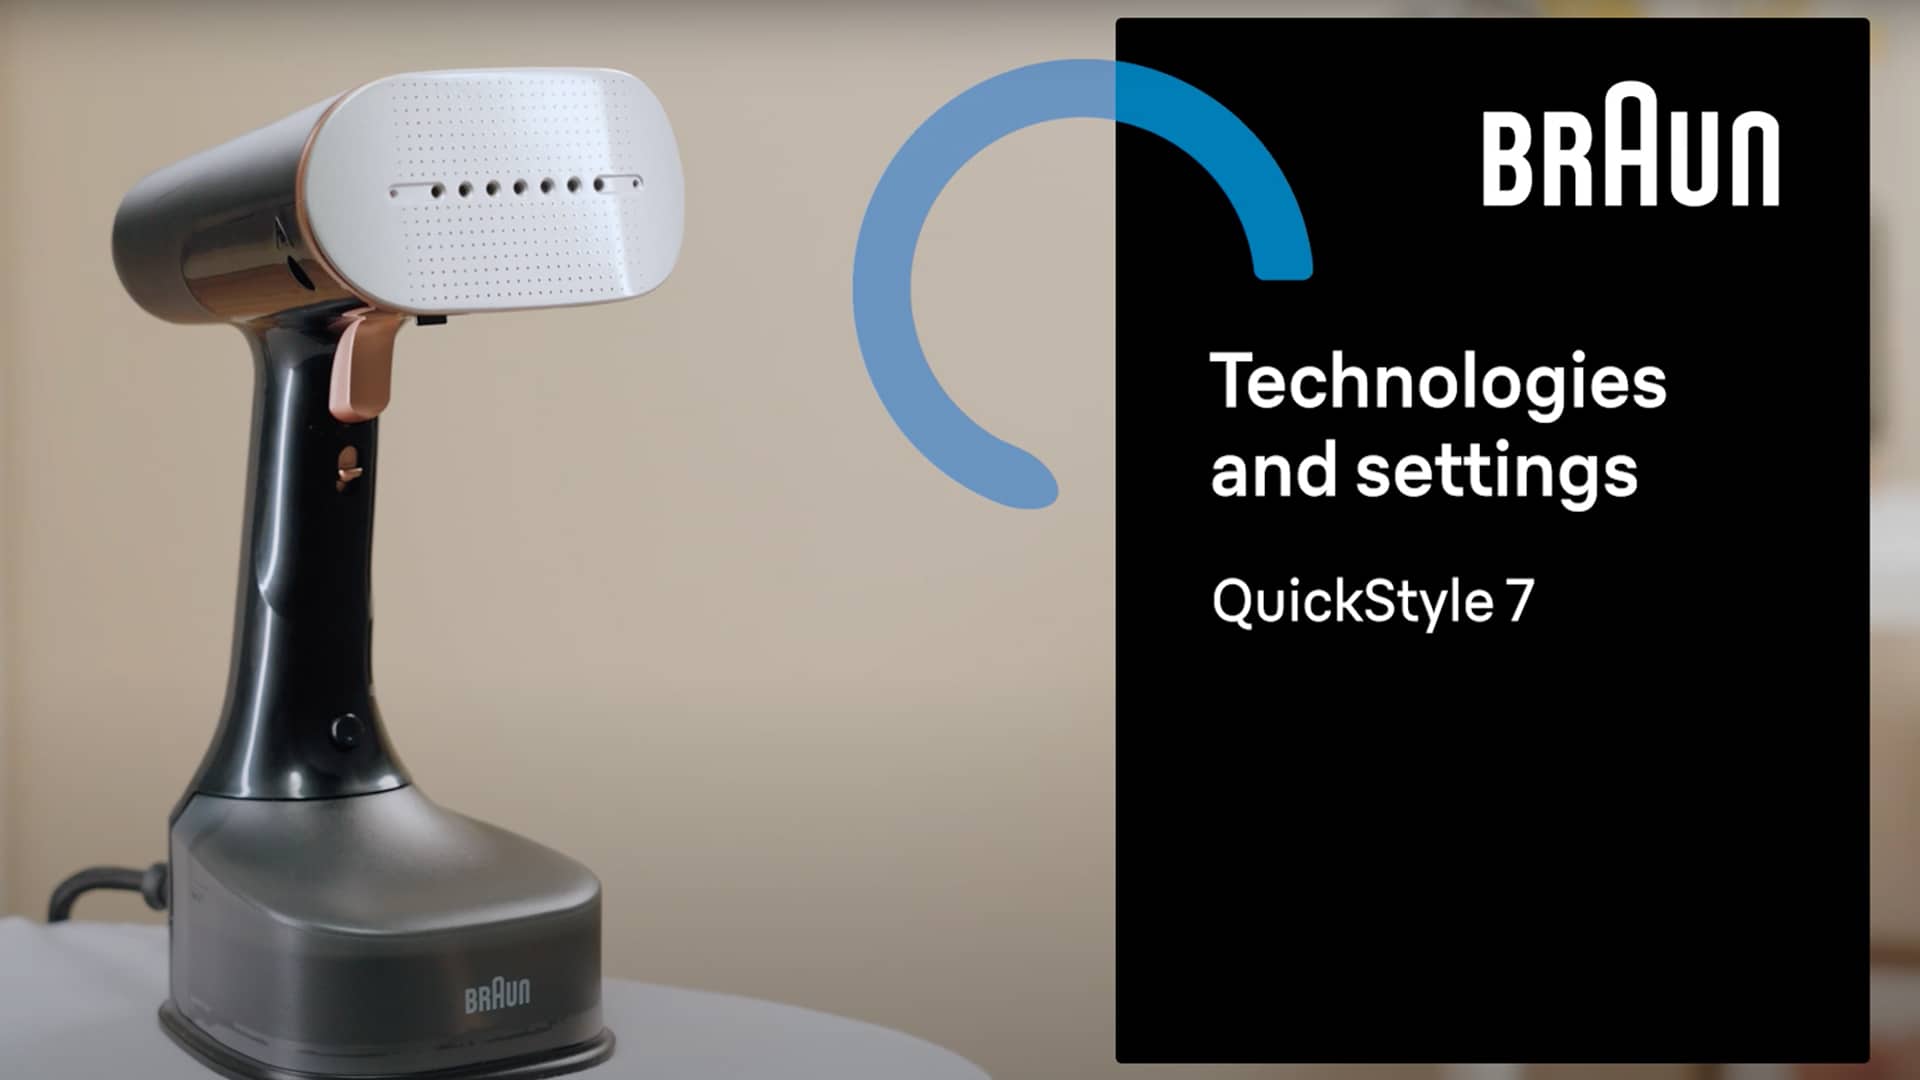 Braun QuickStyle 7 - Technologies and settings 